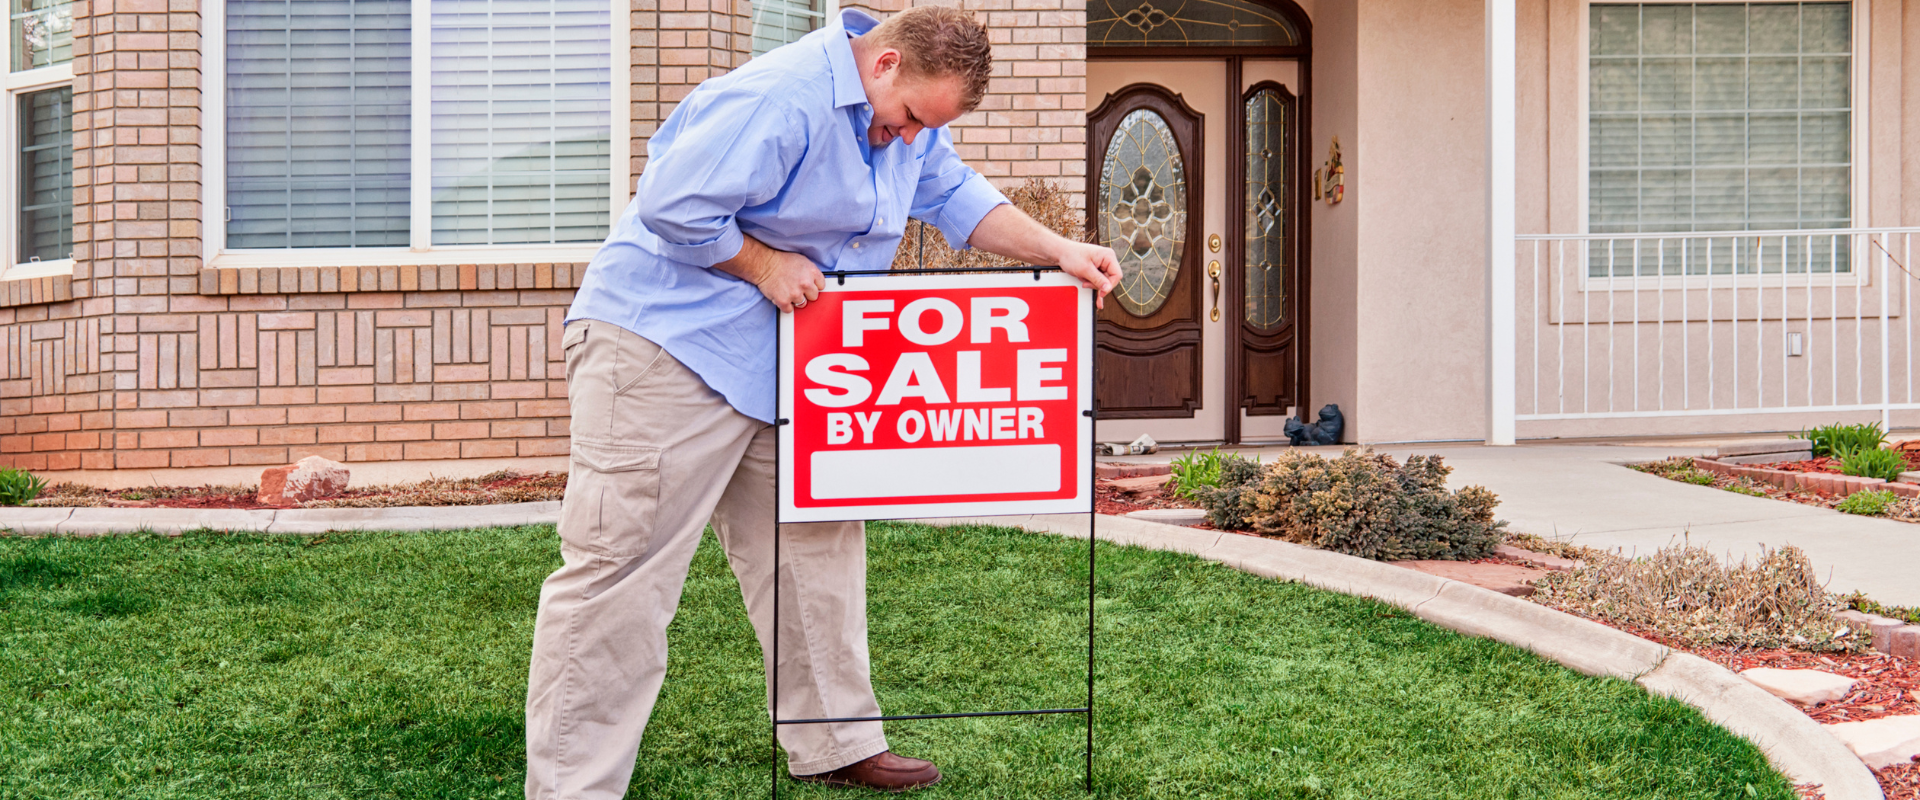 Signs It's Time to Sell Your House for Cash